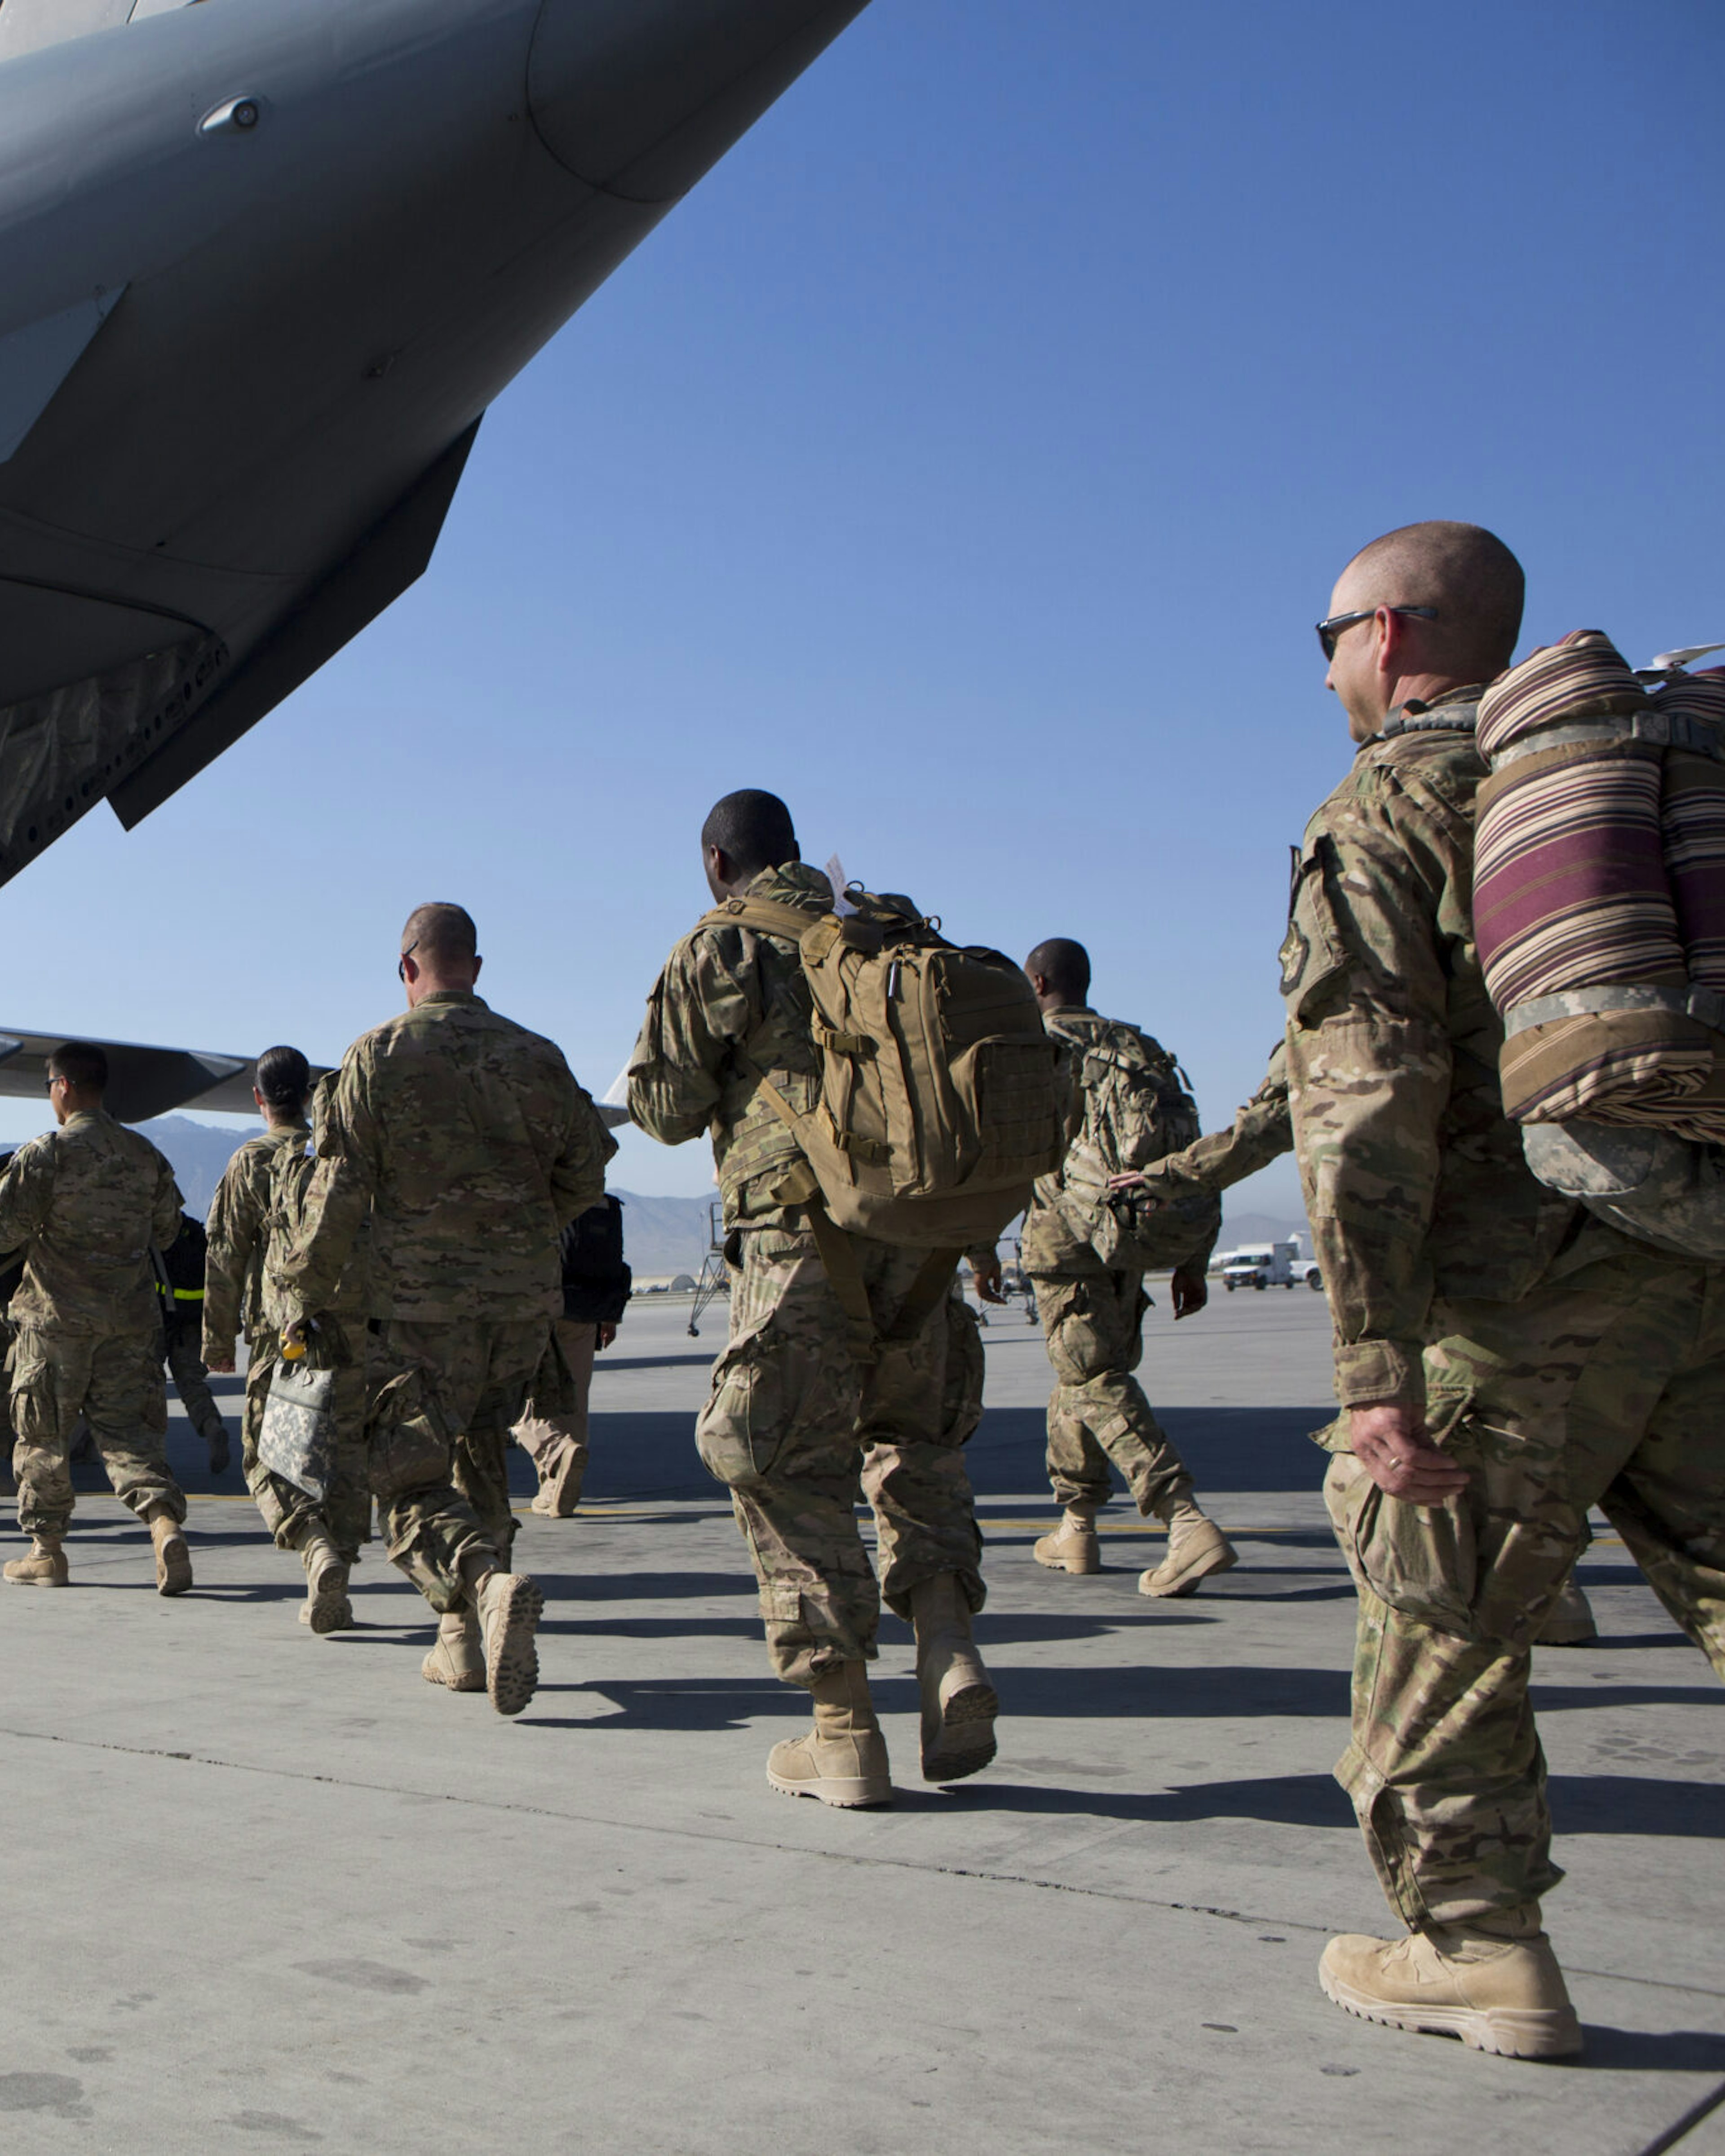 BAGRAM AIR BASE, AFGHANISTAN - MAY 11: U.S. Army soldiers walk to their C-17 cargo plane for departure May 11, 2013 at Bagram Air Base, Afghanistan. U.S. soldiers and marines are part of the NATO troop withdrawal from Afghanistan, to be completed by the end of 2014. (Photo by Robert Nickelsberg/Getty Images)